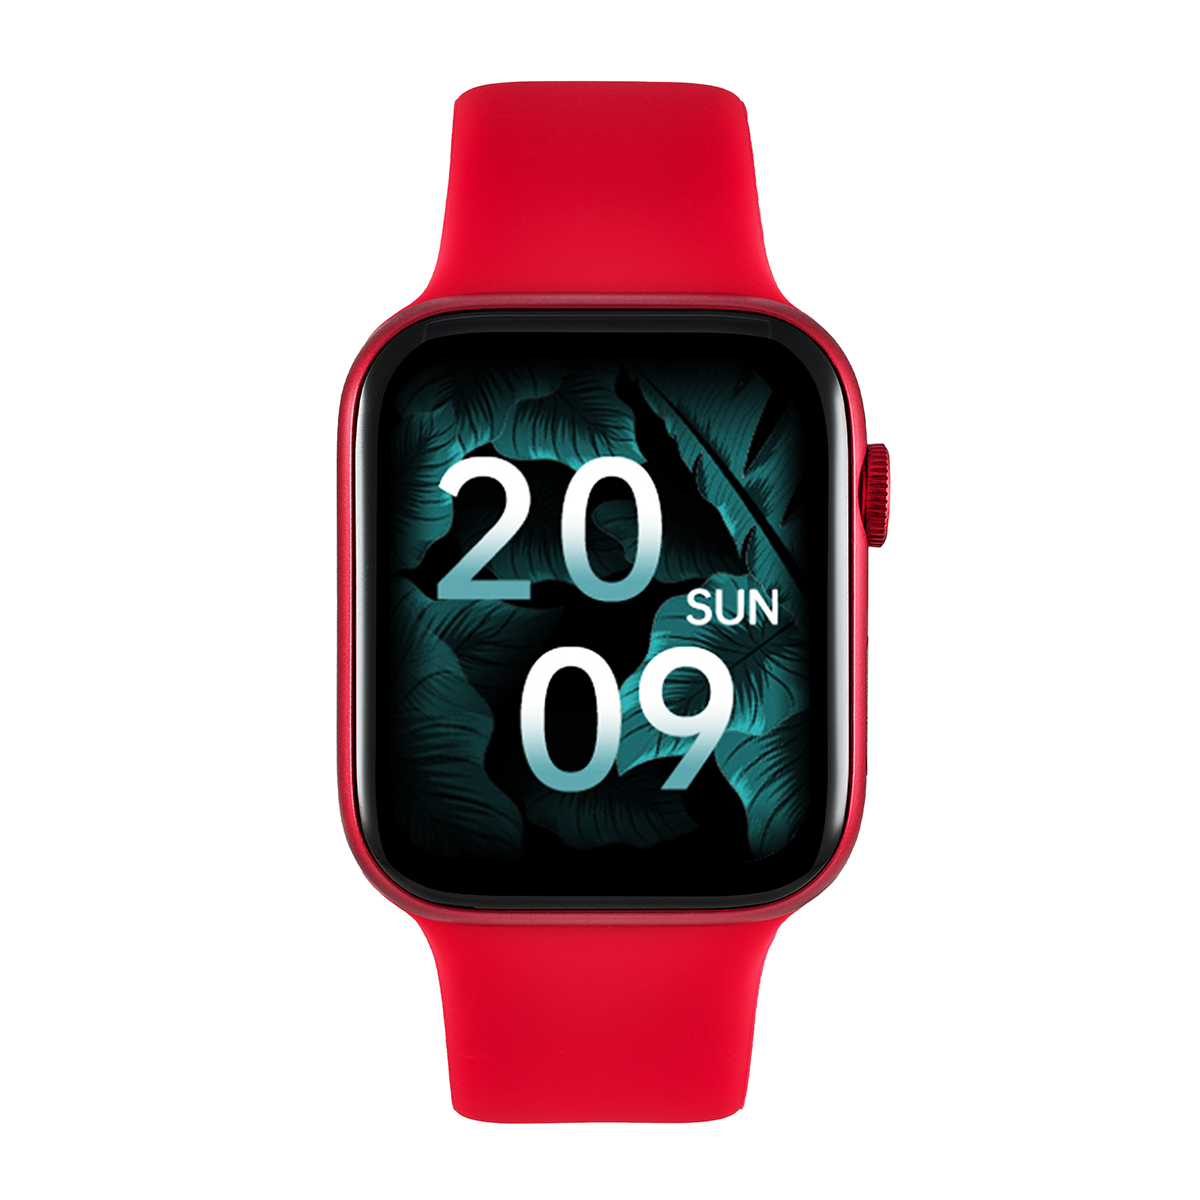 Smartwatch Rot Kunststoff Rote WATCHMARK Wi12 Silizium,